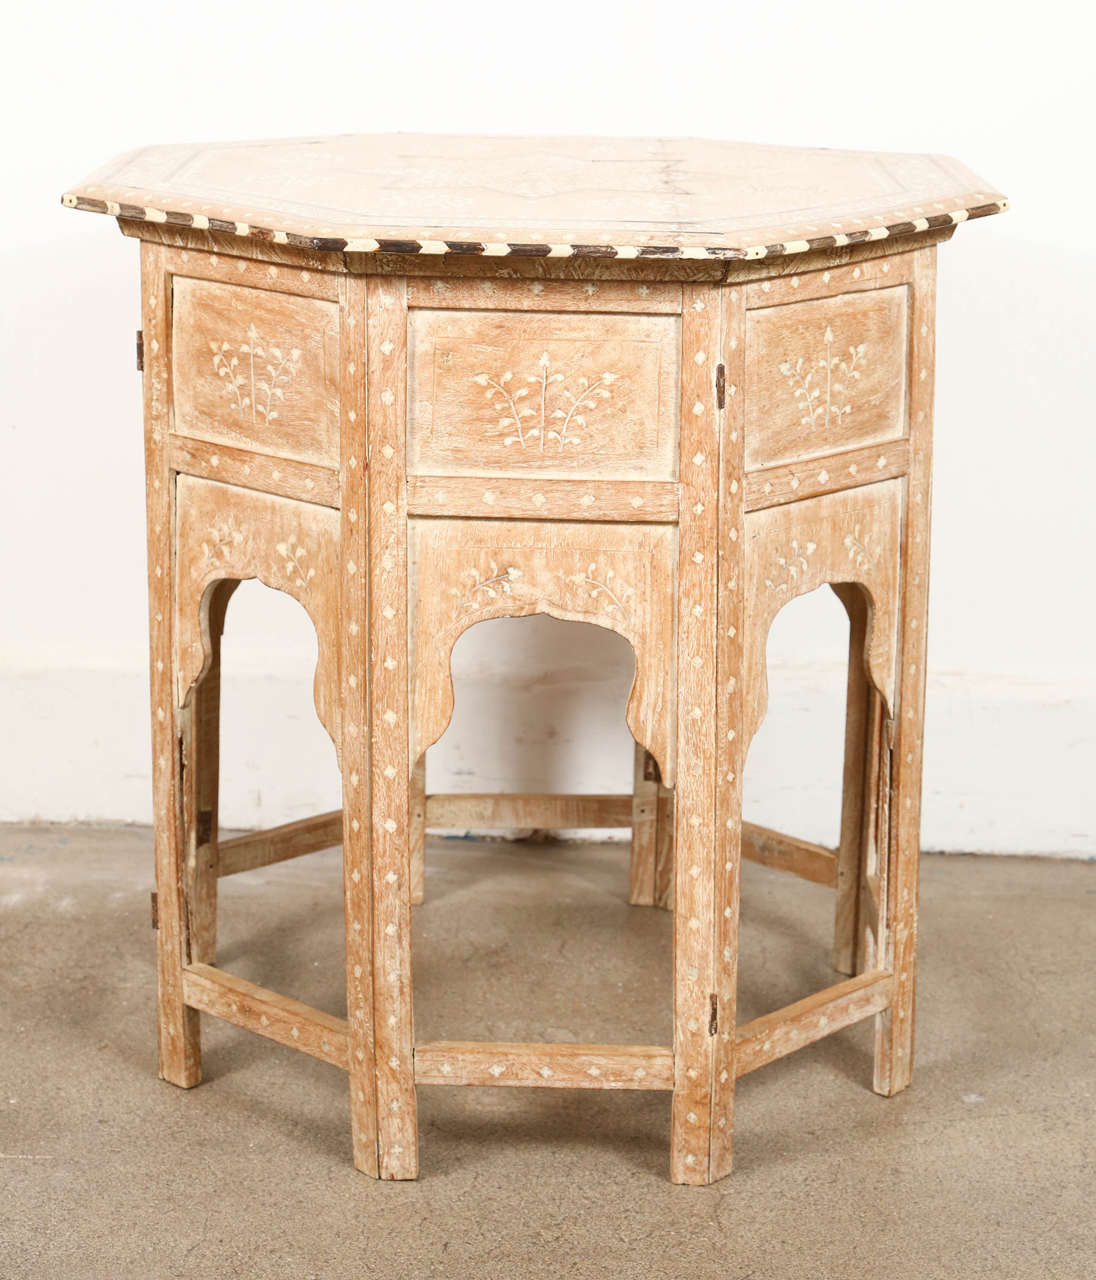 Anglo-Indian folding bone inlaid octagonal side table. Fine and elegant Anglo-Indian octagonal bleach wood table with elaborate bone and ebony inlay.The octagonal surface is finely carved and inlaid with bone and ebony floral and star designs. The